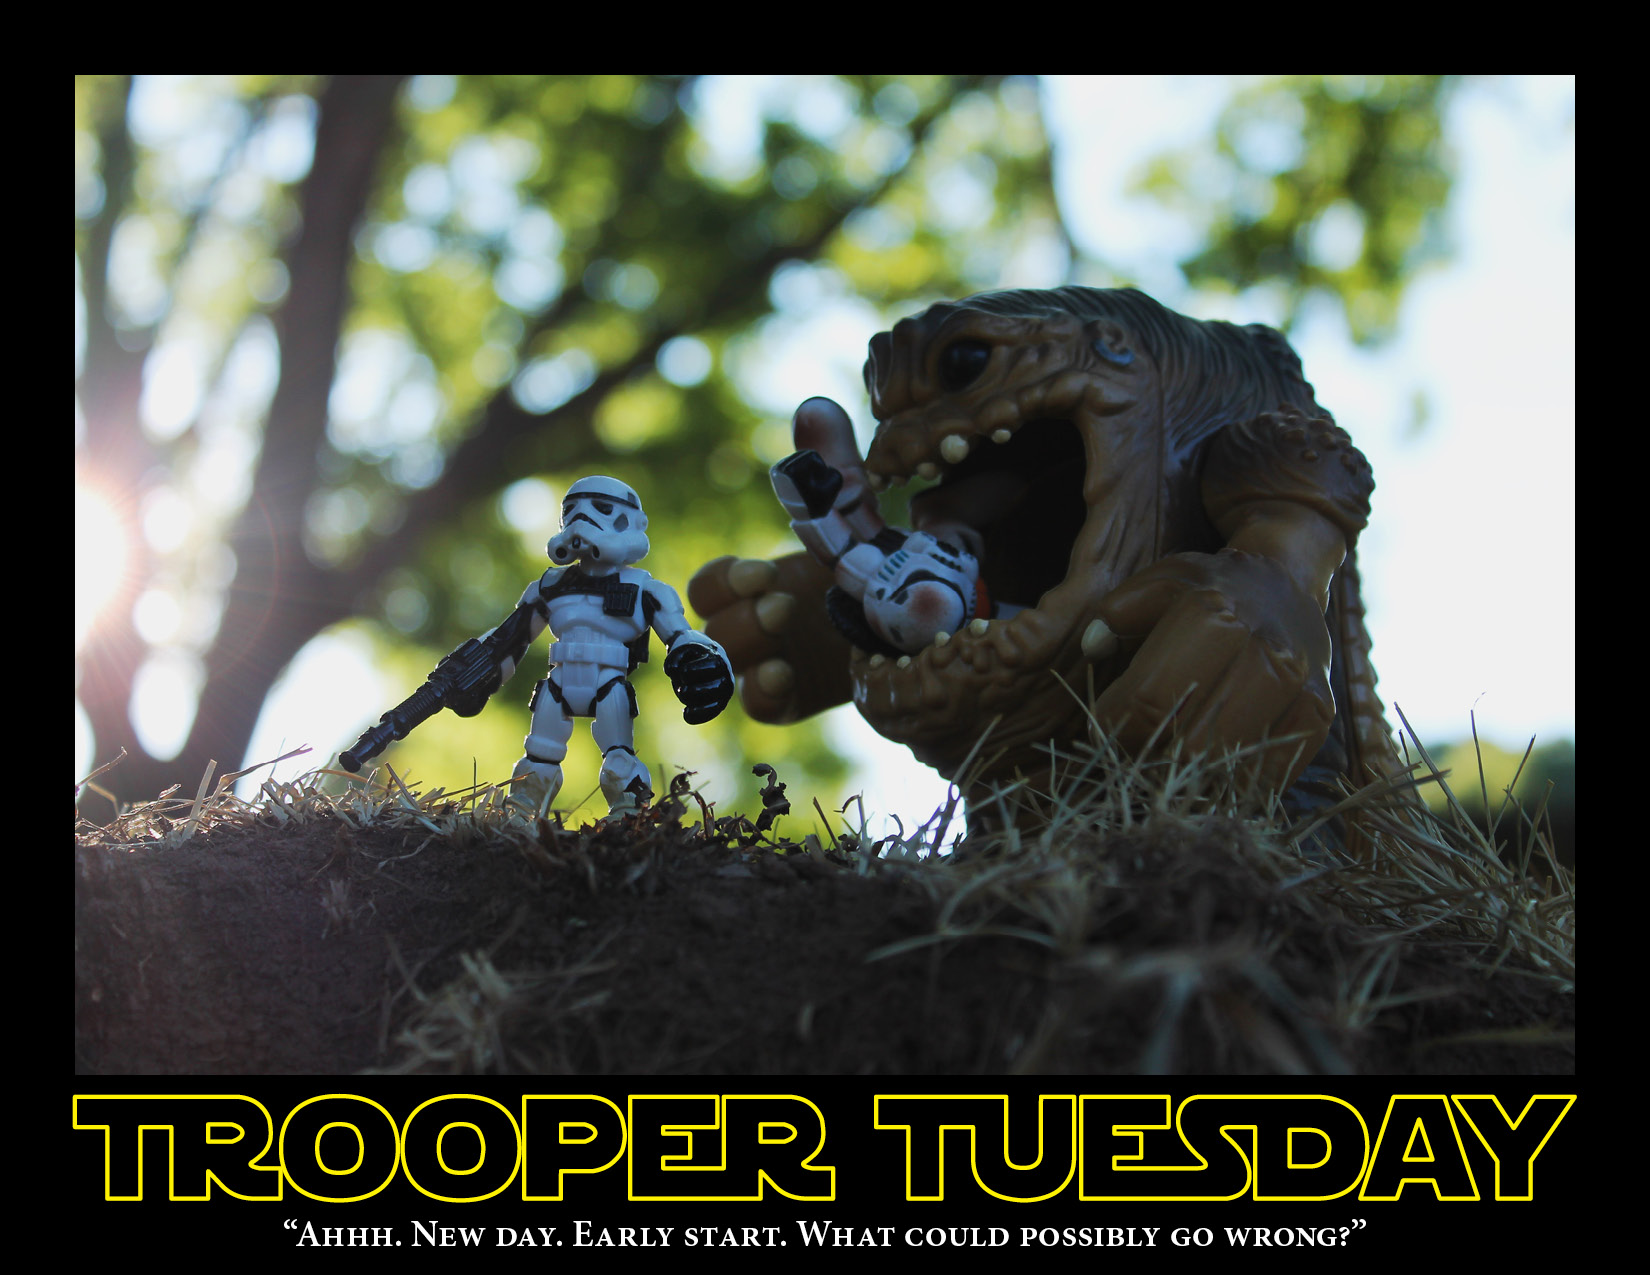 A Sandtrooper is eaten by a rancor while another Sandtrooper stands unawares.